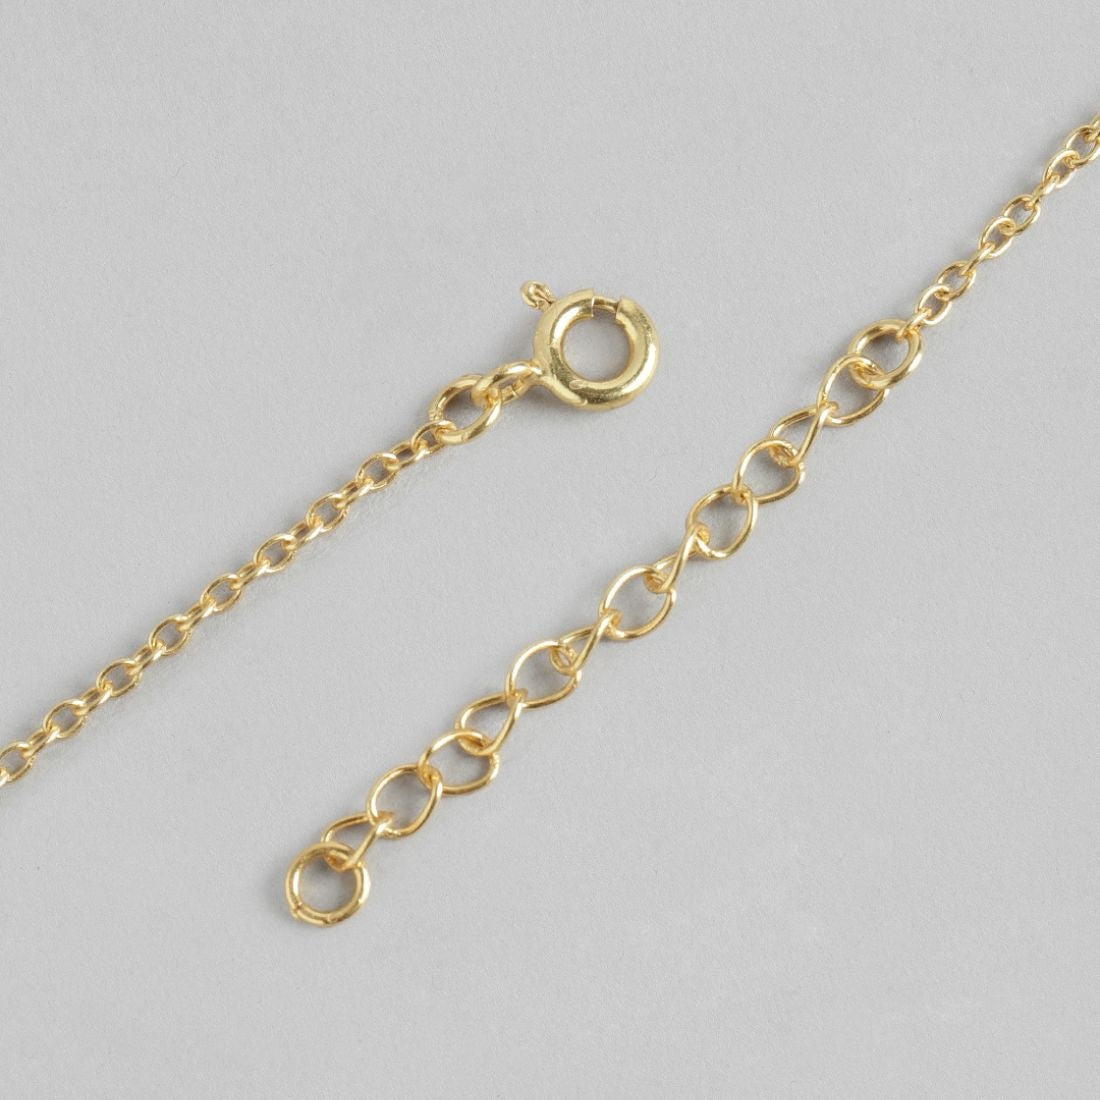 Golden Serenity Gold-Plated 925 Sterling Silver Mangalsutra